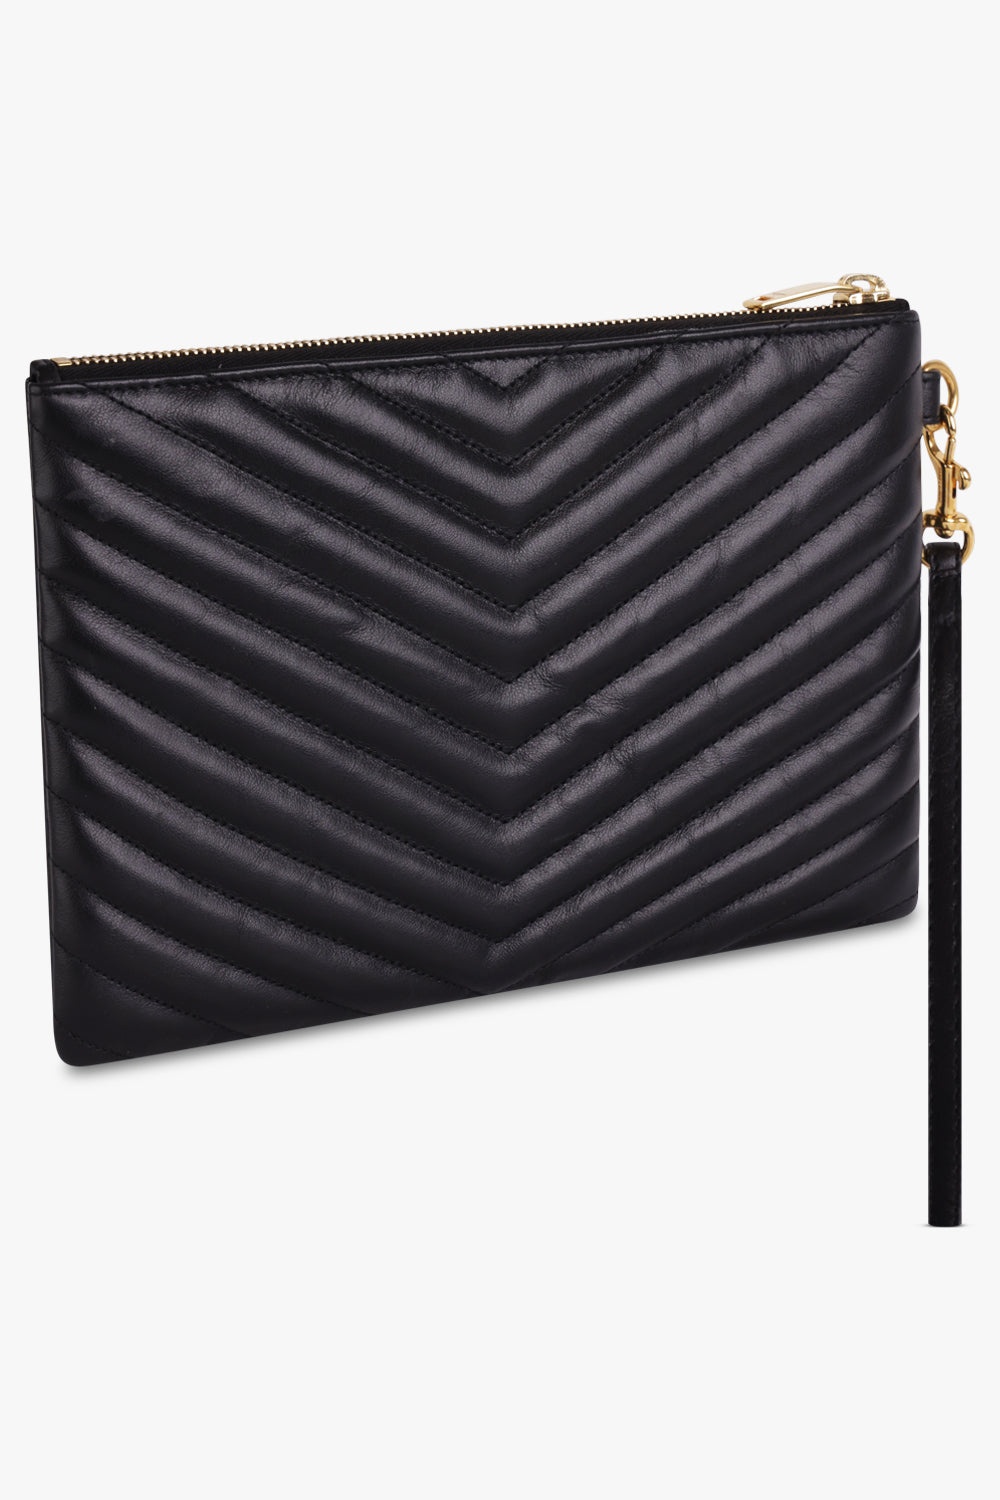 SMALL MONOGRAMME QUILTED POUCH | BLACK/GOLD - 2